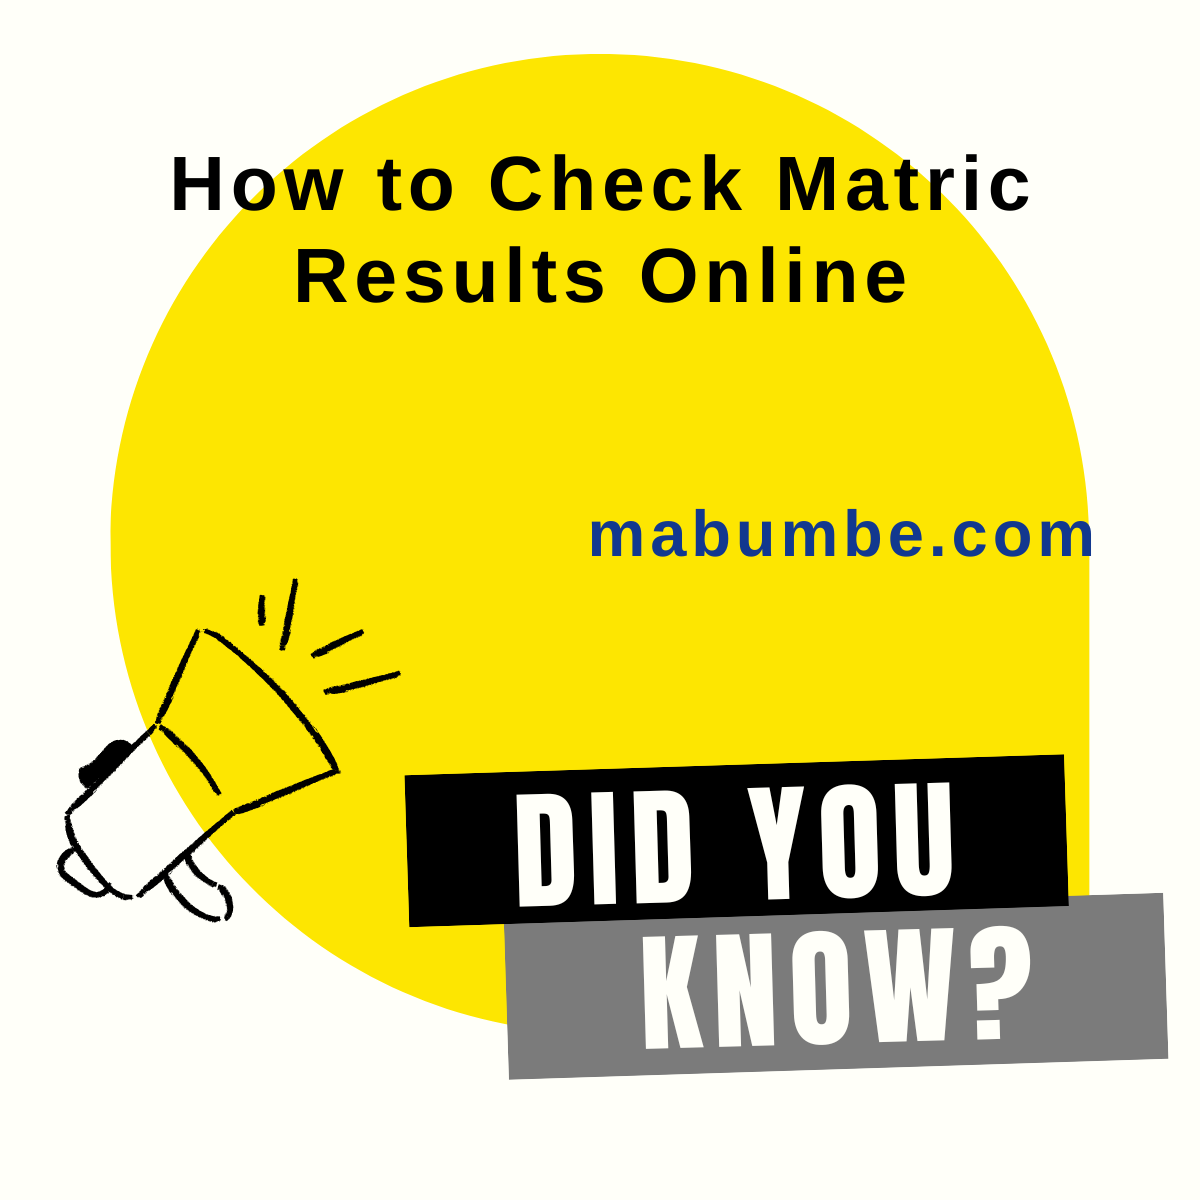 Learn How to Check Matric Results Online